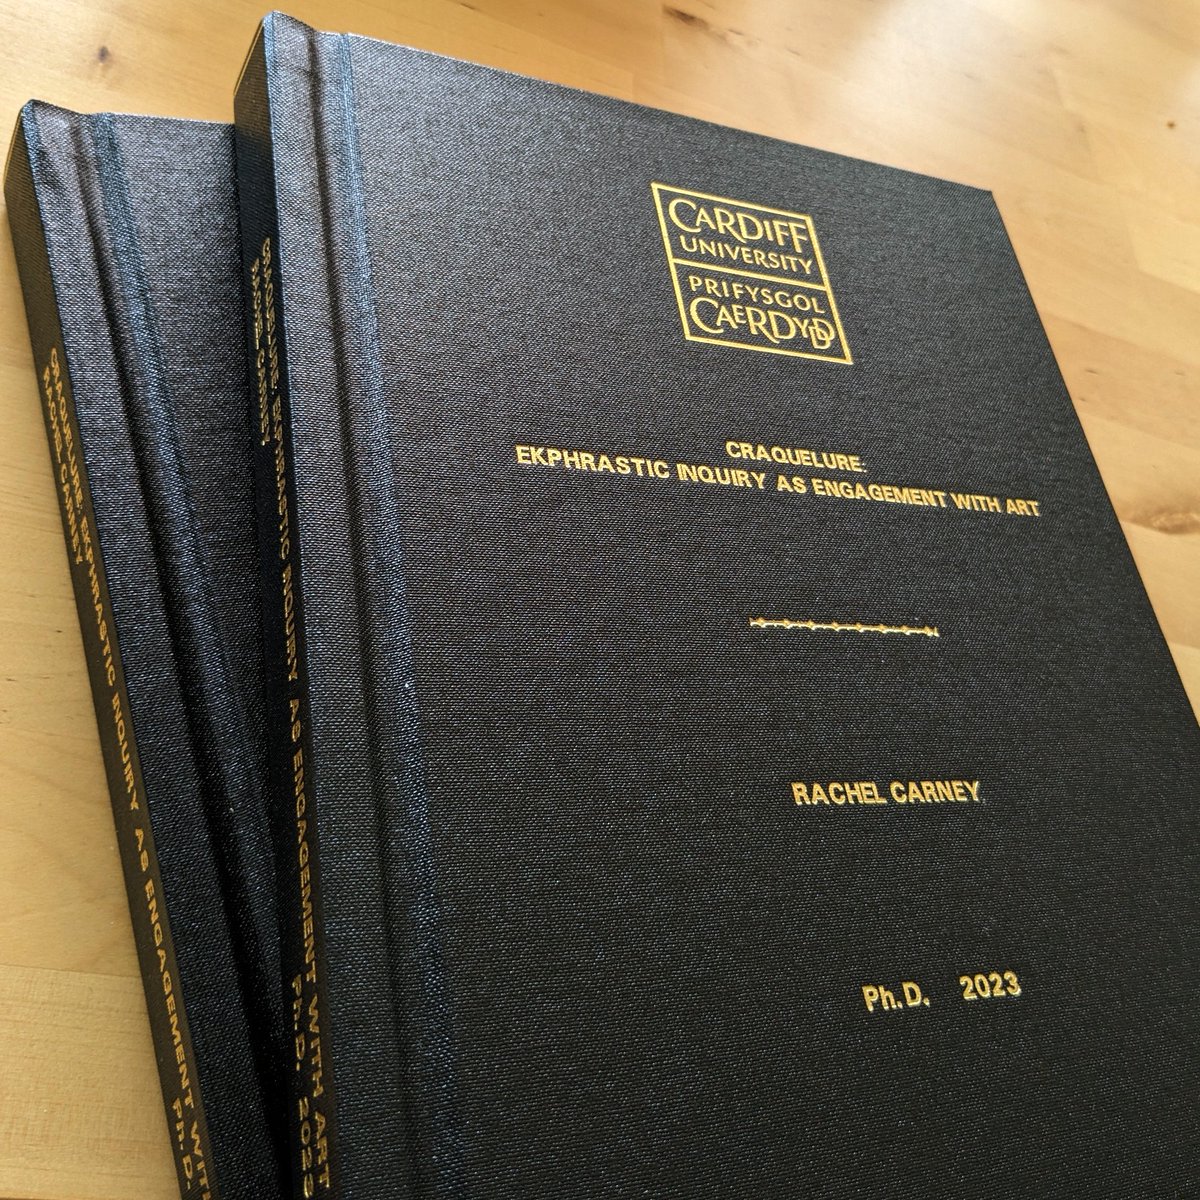 Today, I finally handed in the book bound copies of my #phd thesis. Feels very strange! Thanks to everyone who has supported & encouraged me along the way, and to @SWWDTP for the funding! @CUEngCommPhilos @AberEnglishDept